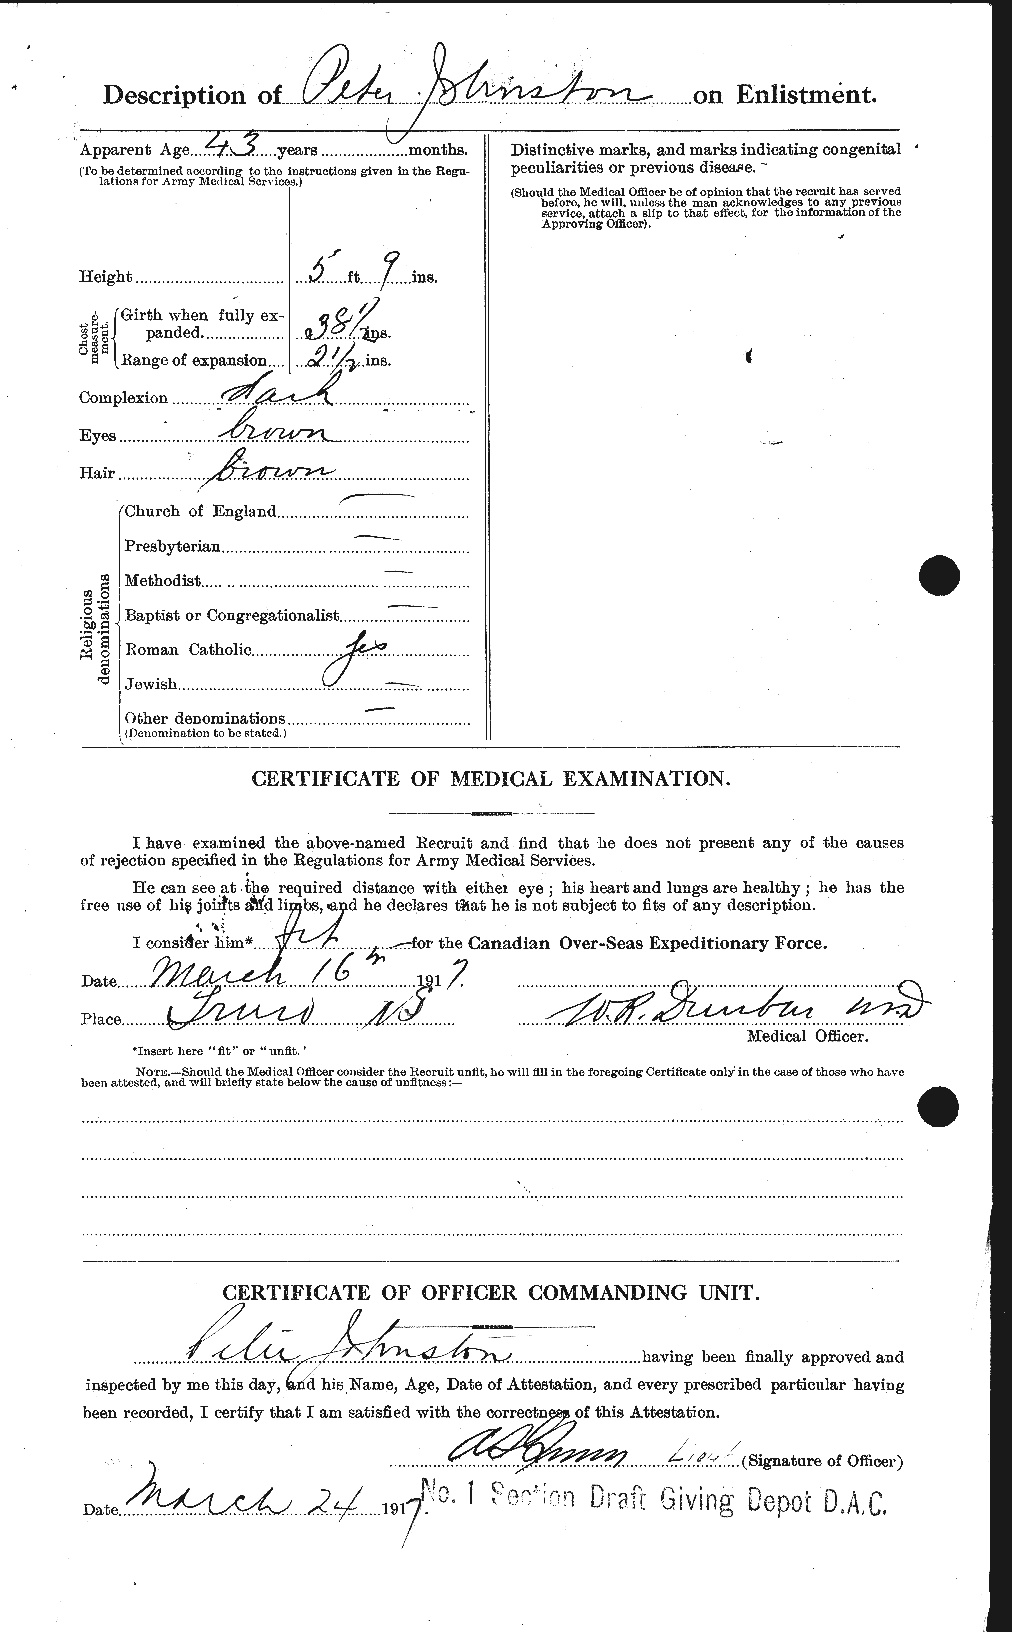 Personnel Records of the First World War - CEF 423042b